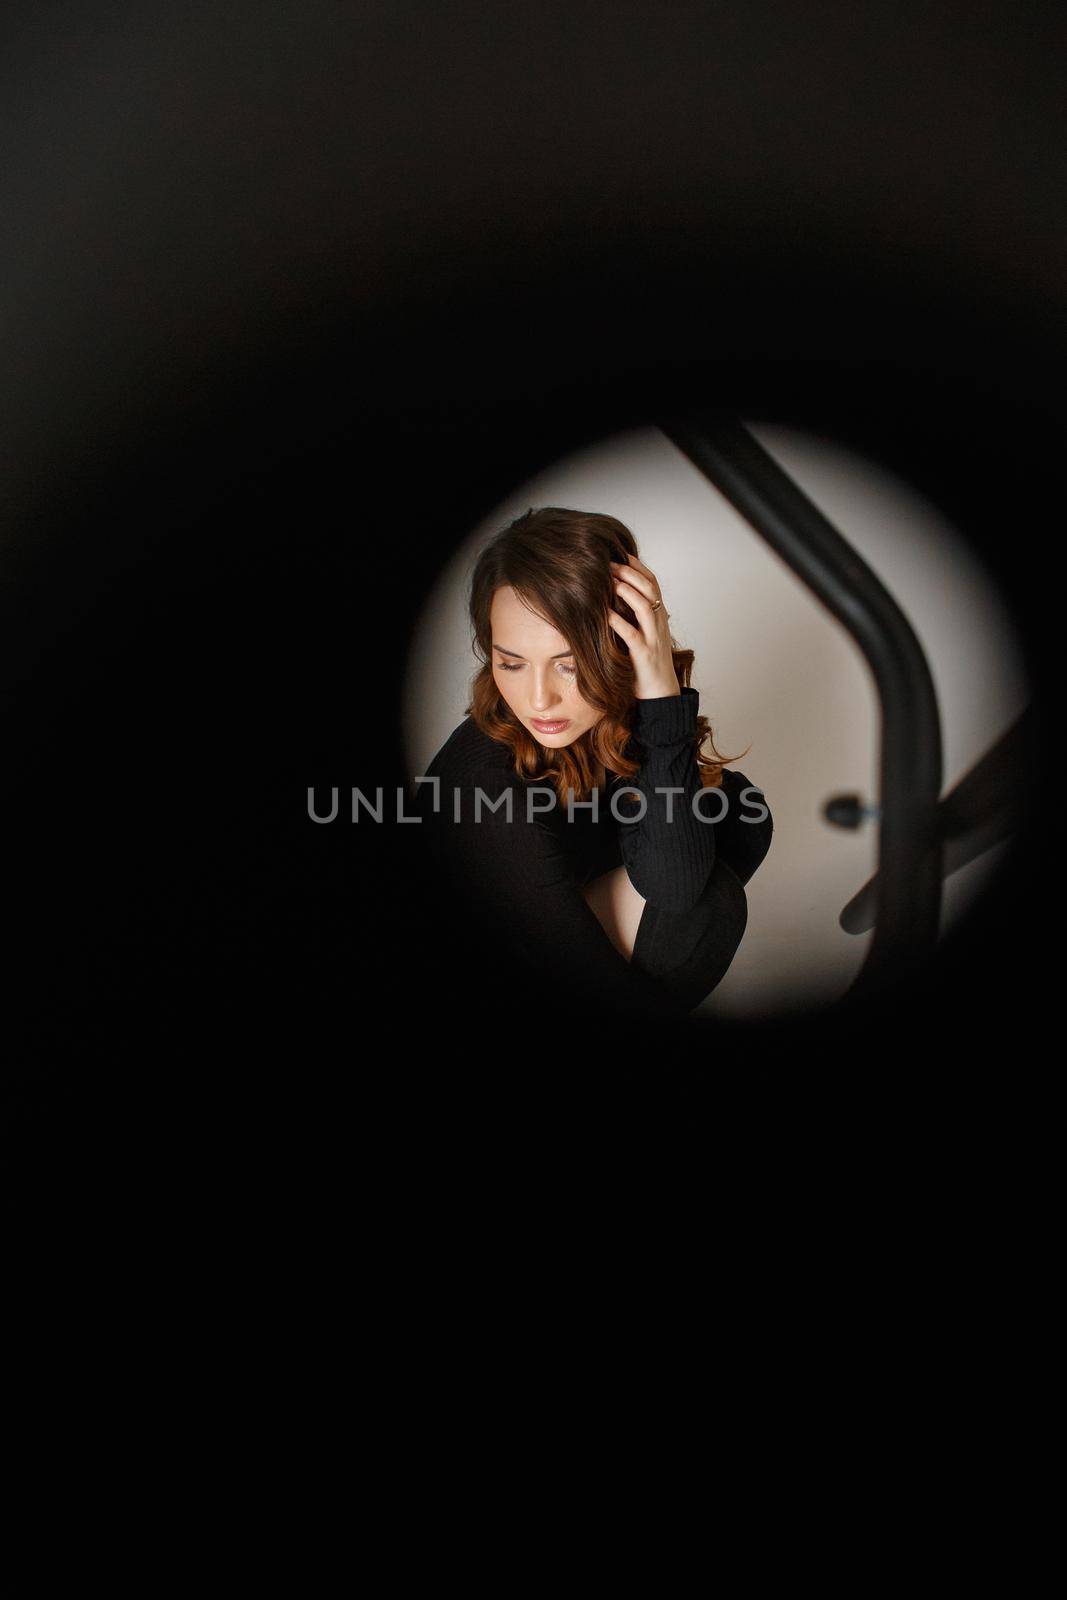 A girl in a black skirt photographed through a black chair.